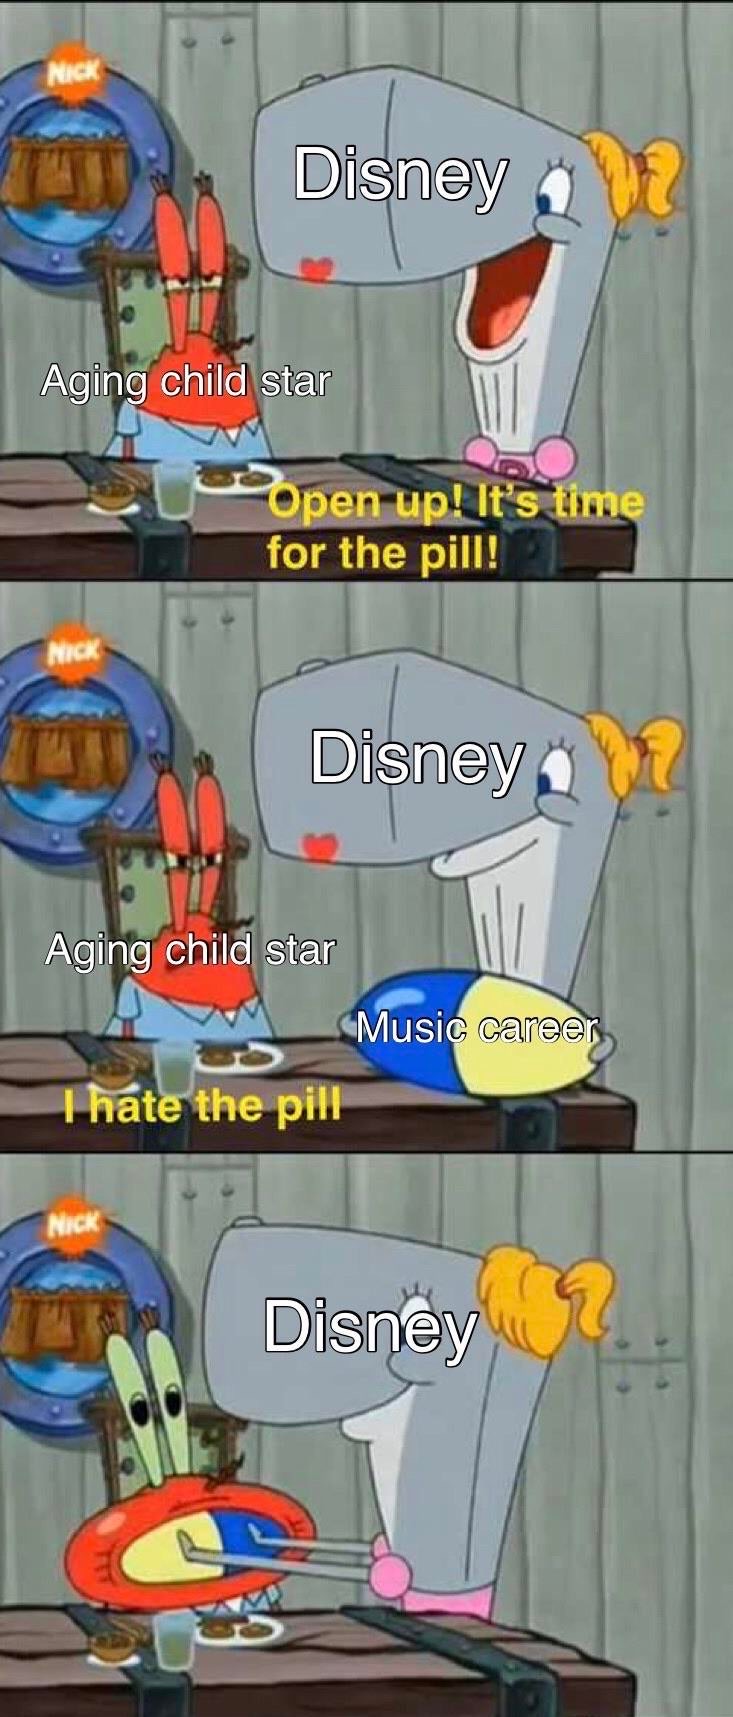 wholesome love and support meme - Nick Ttd Disney Aging child star open up! It's time for the pill! Nick Disney Aging child star Music career I hate the pill Nick Disney